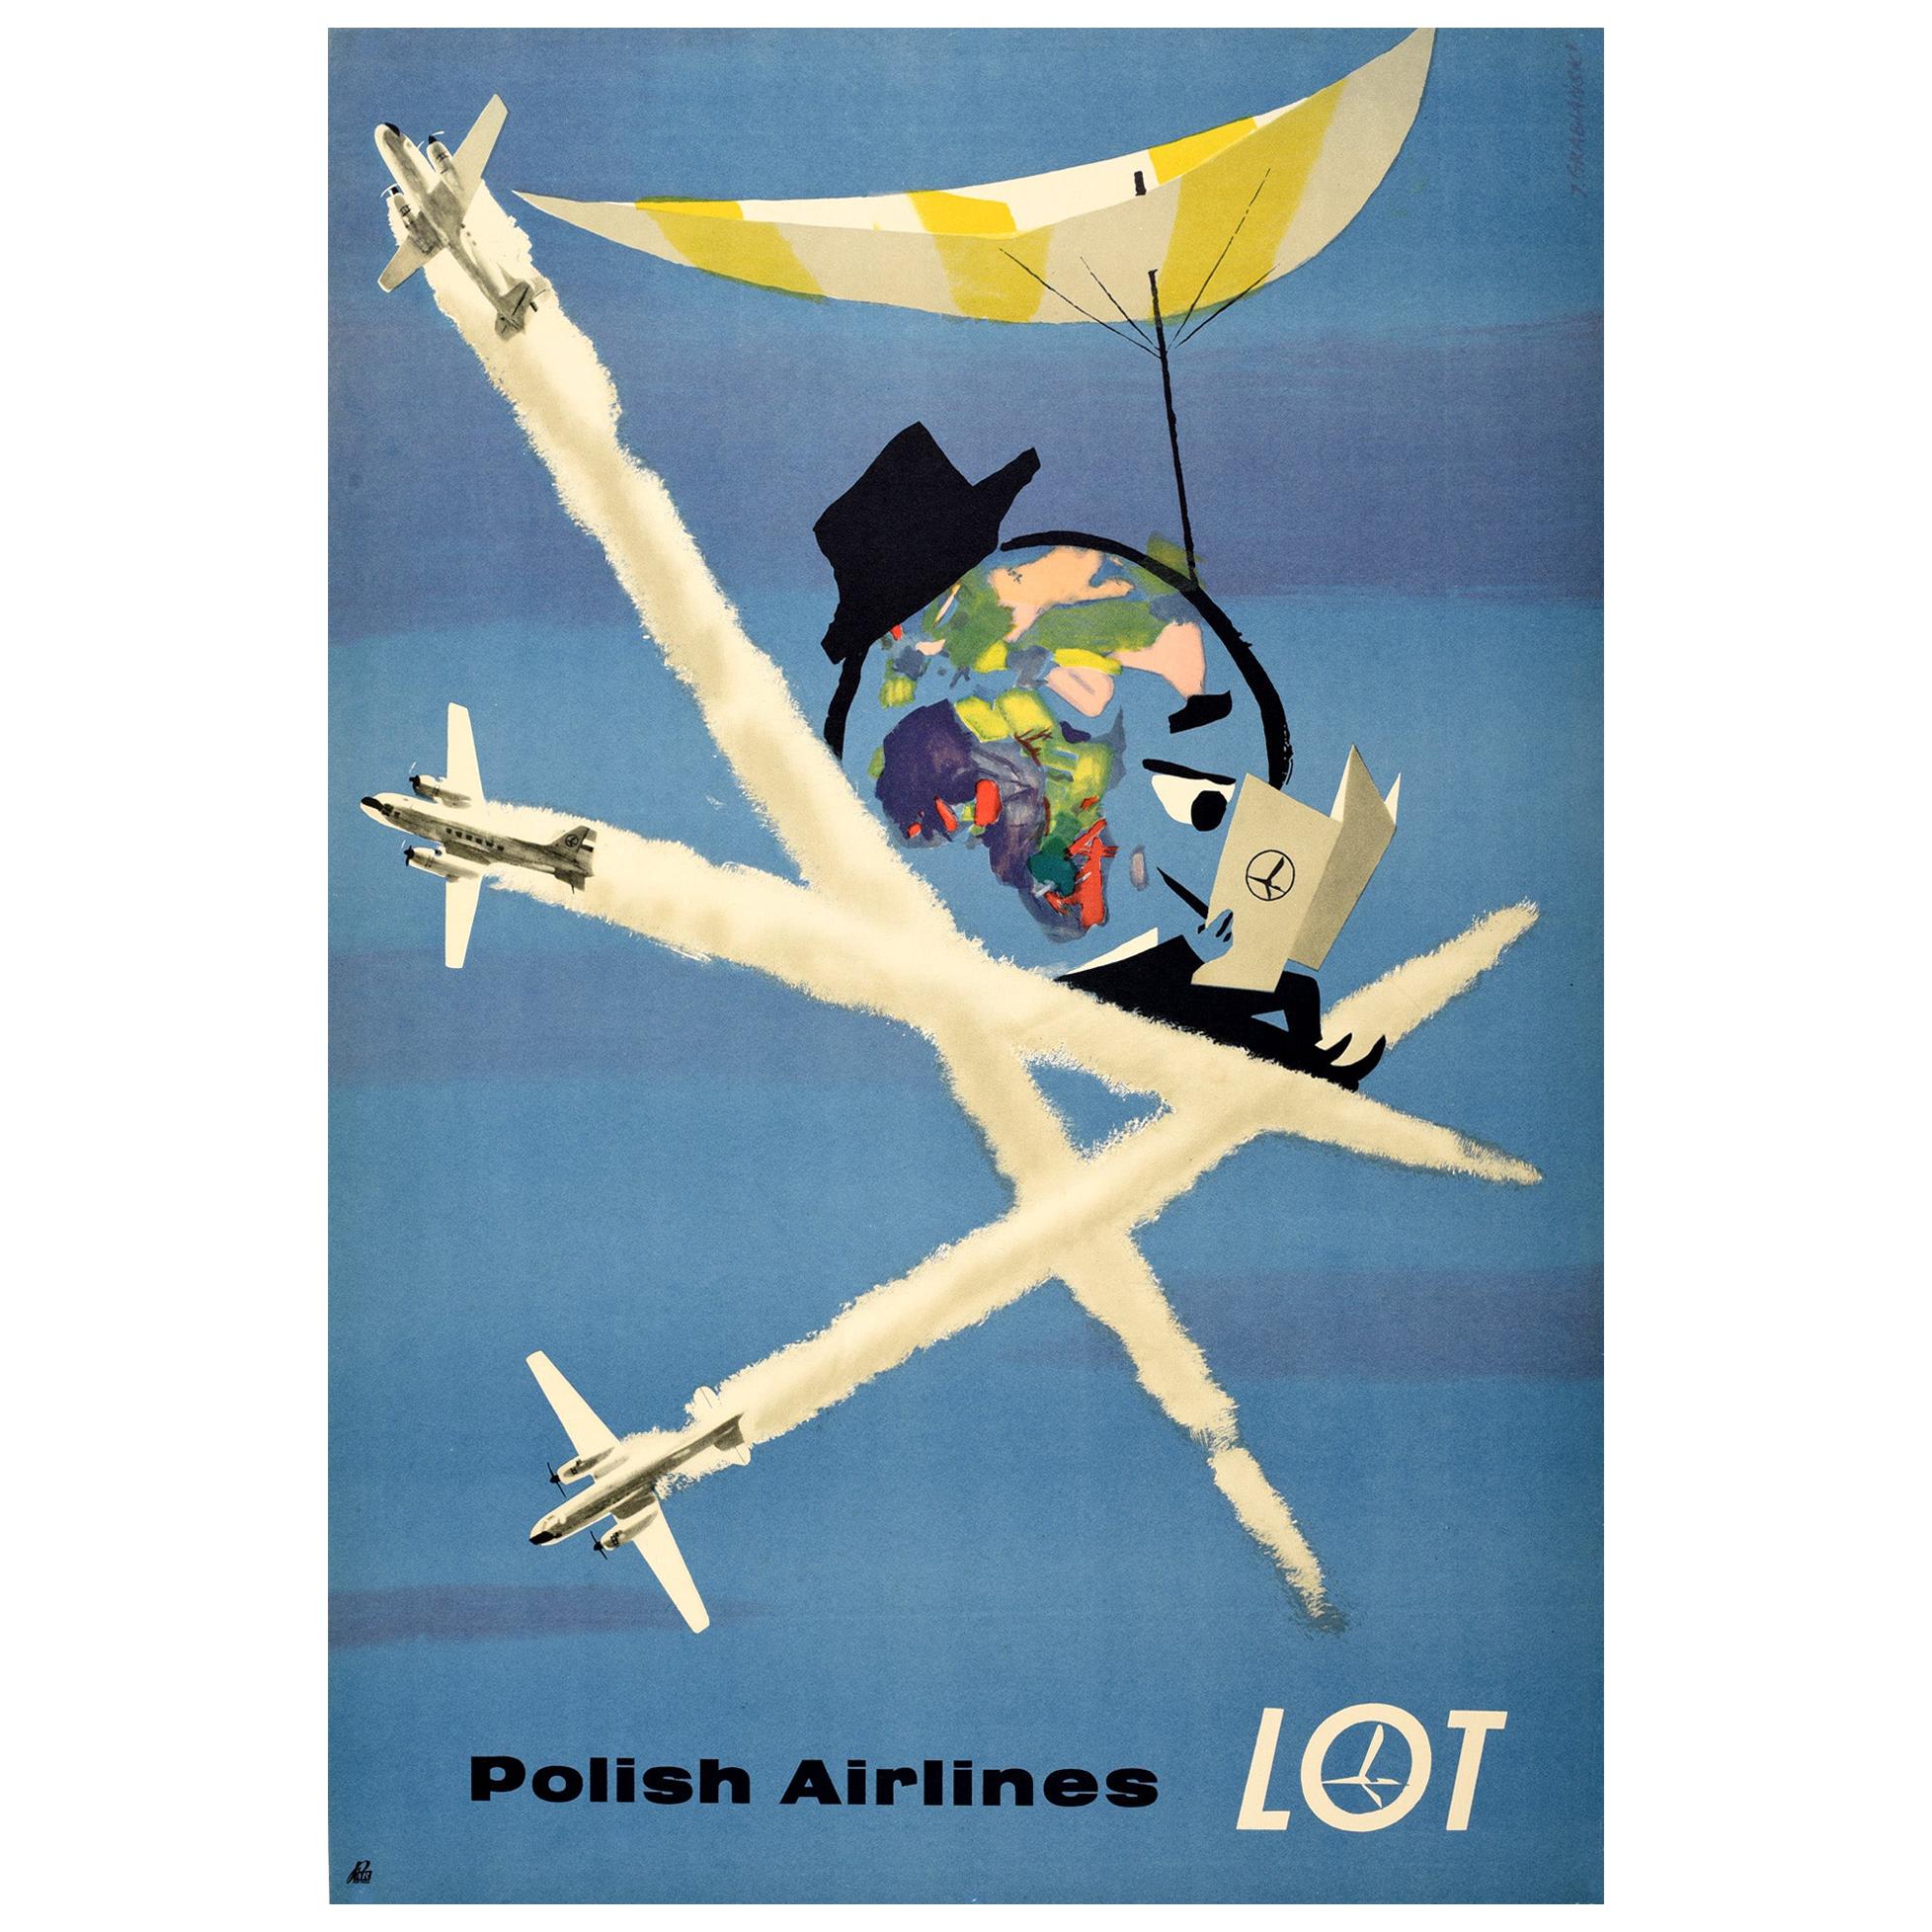 Original Vintage Poster For LOT Polish Airlines World Travel Planes Deck Chair For Sale